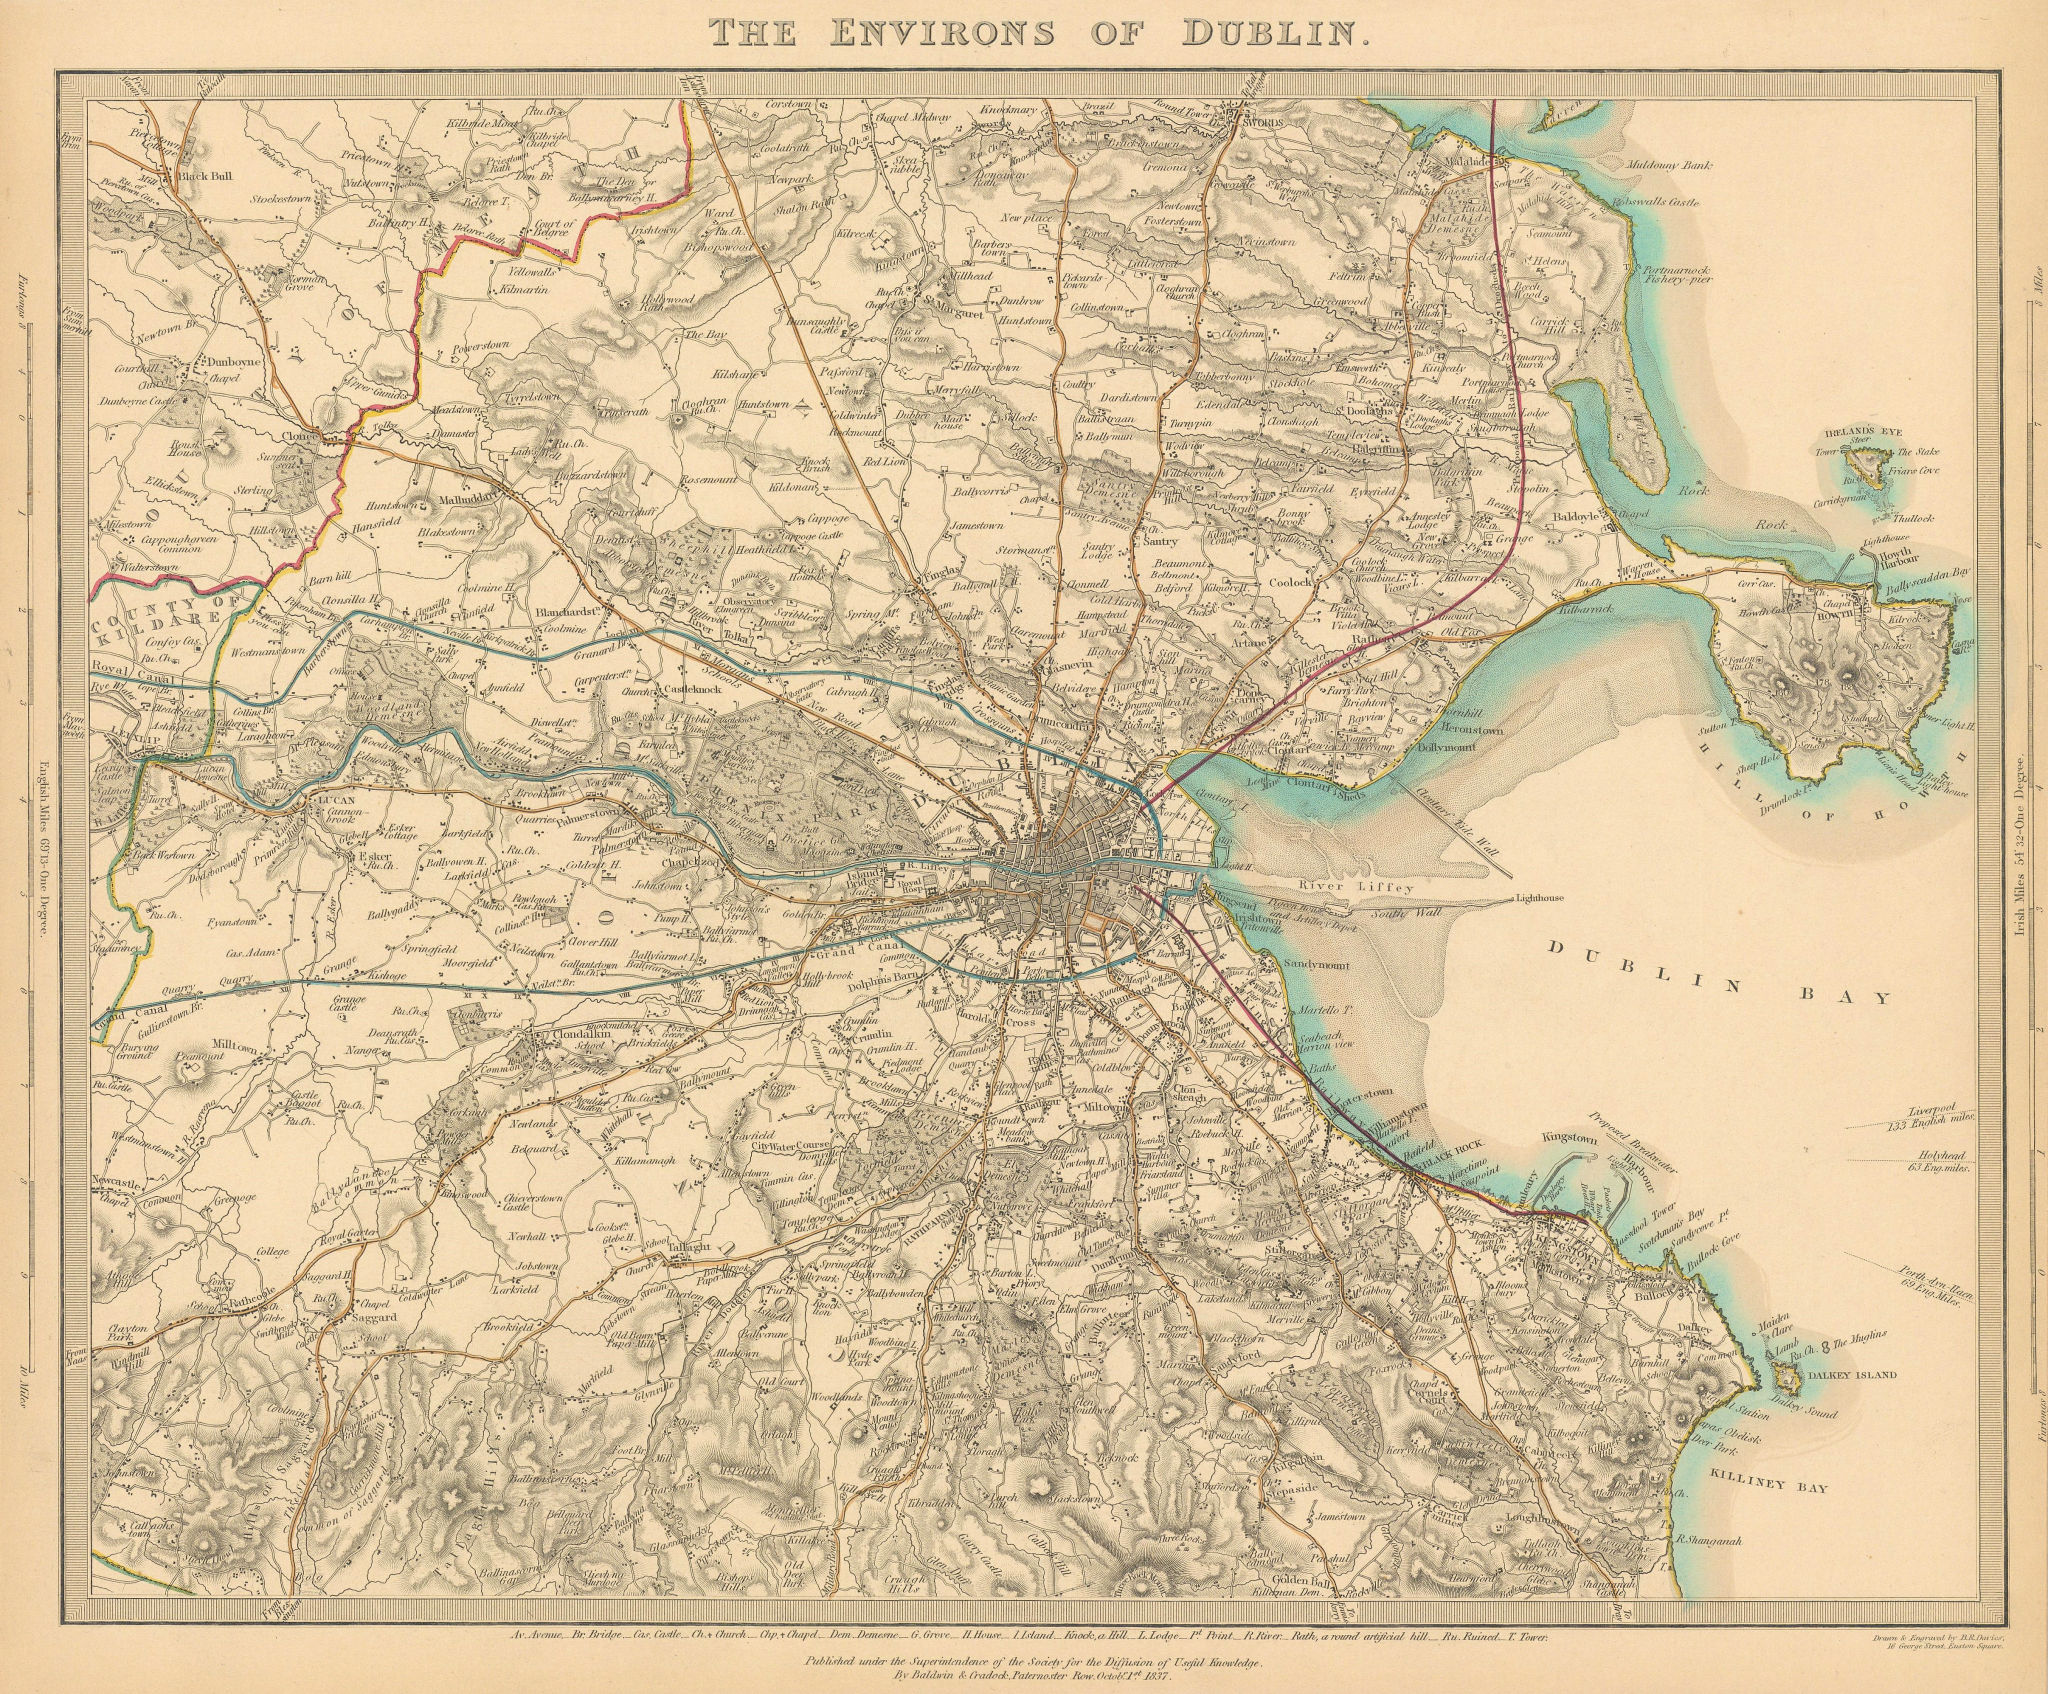 Associate Product IRELAND. The environs of Dublin. SDUK 1844 old antique vintage map plan chart